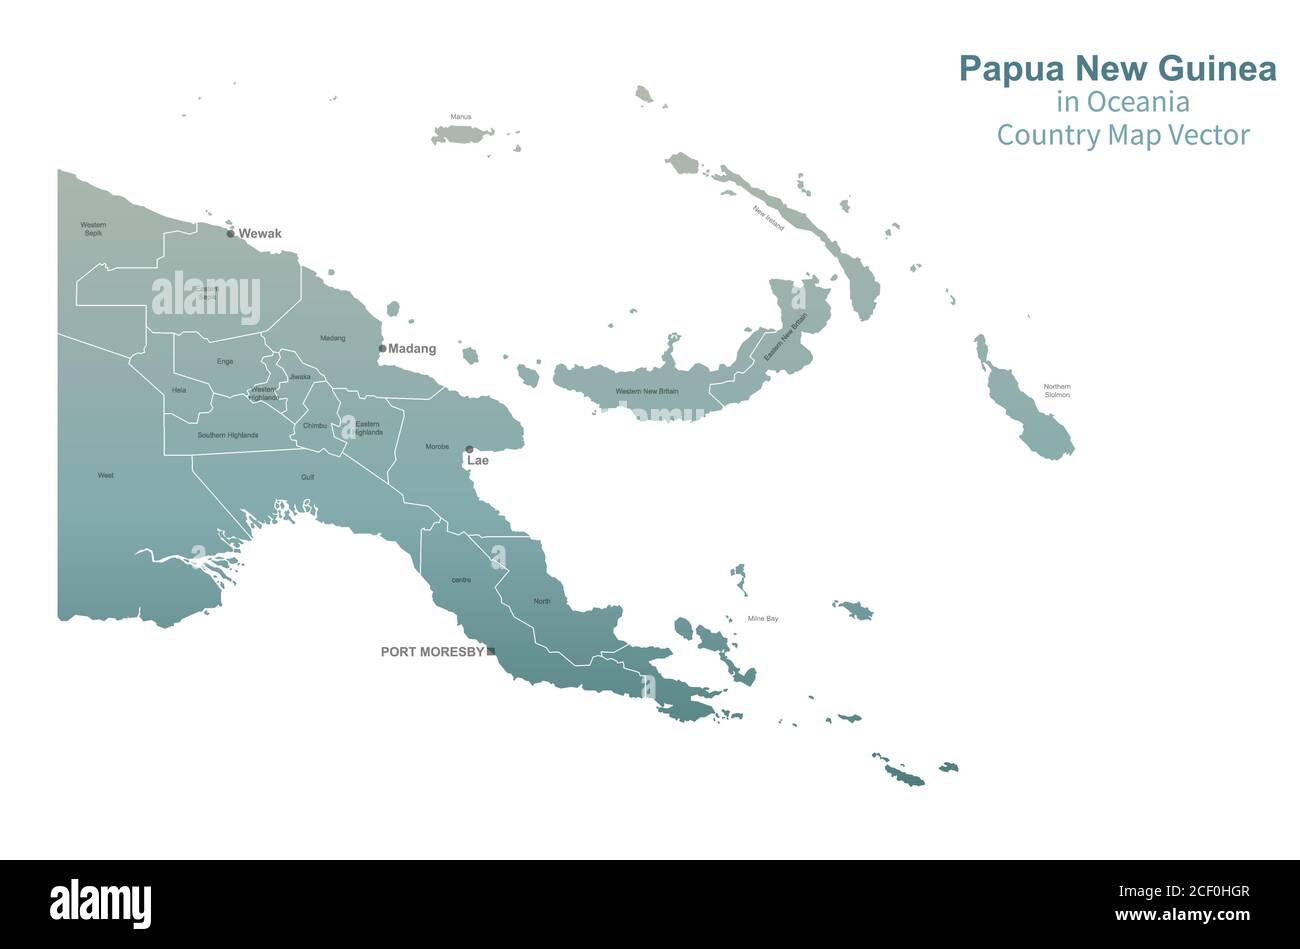 Papua New Guinea Vector map. South Pacific Country map. Stock Vector